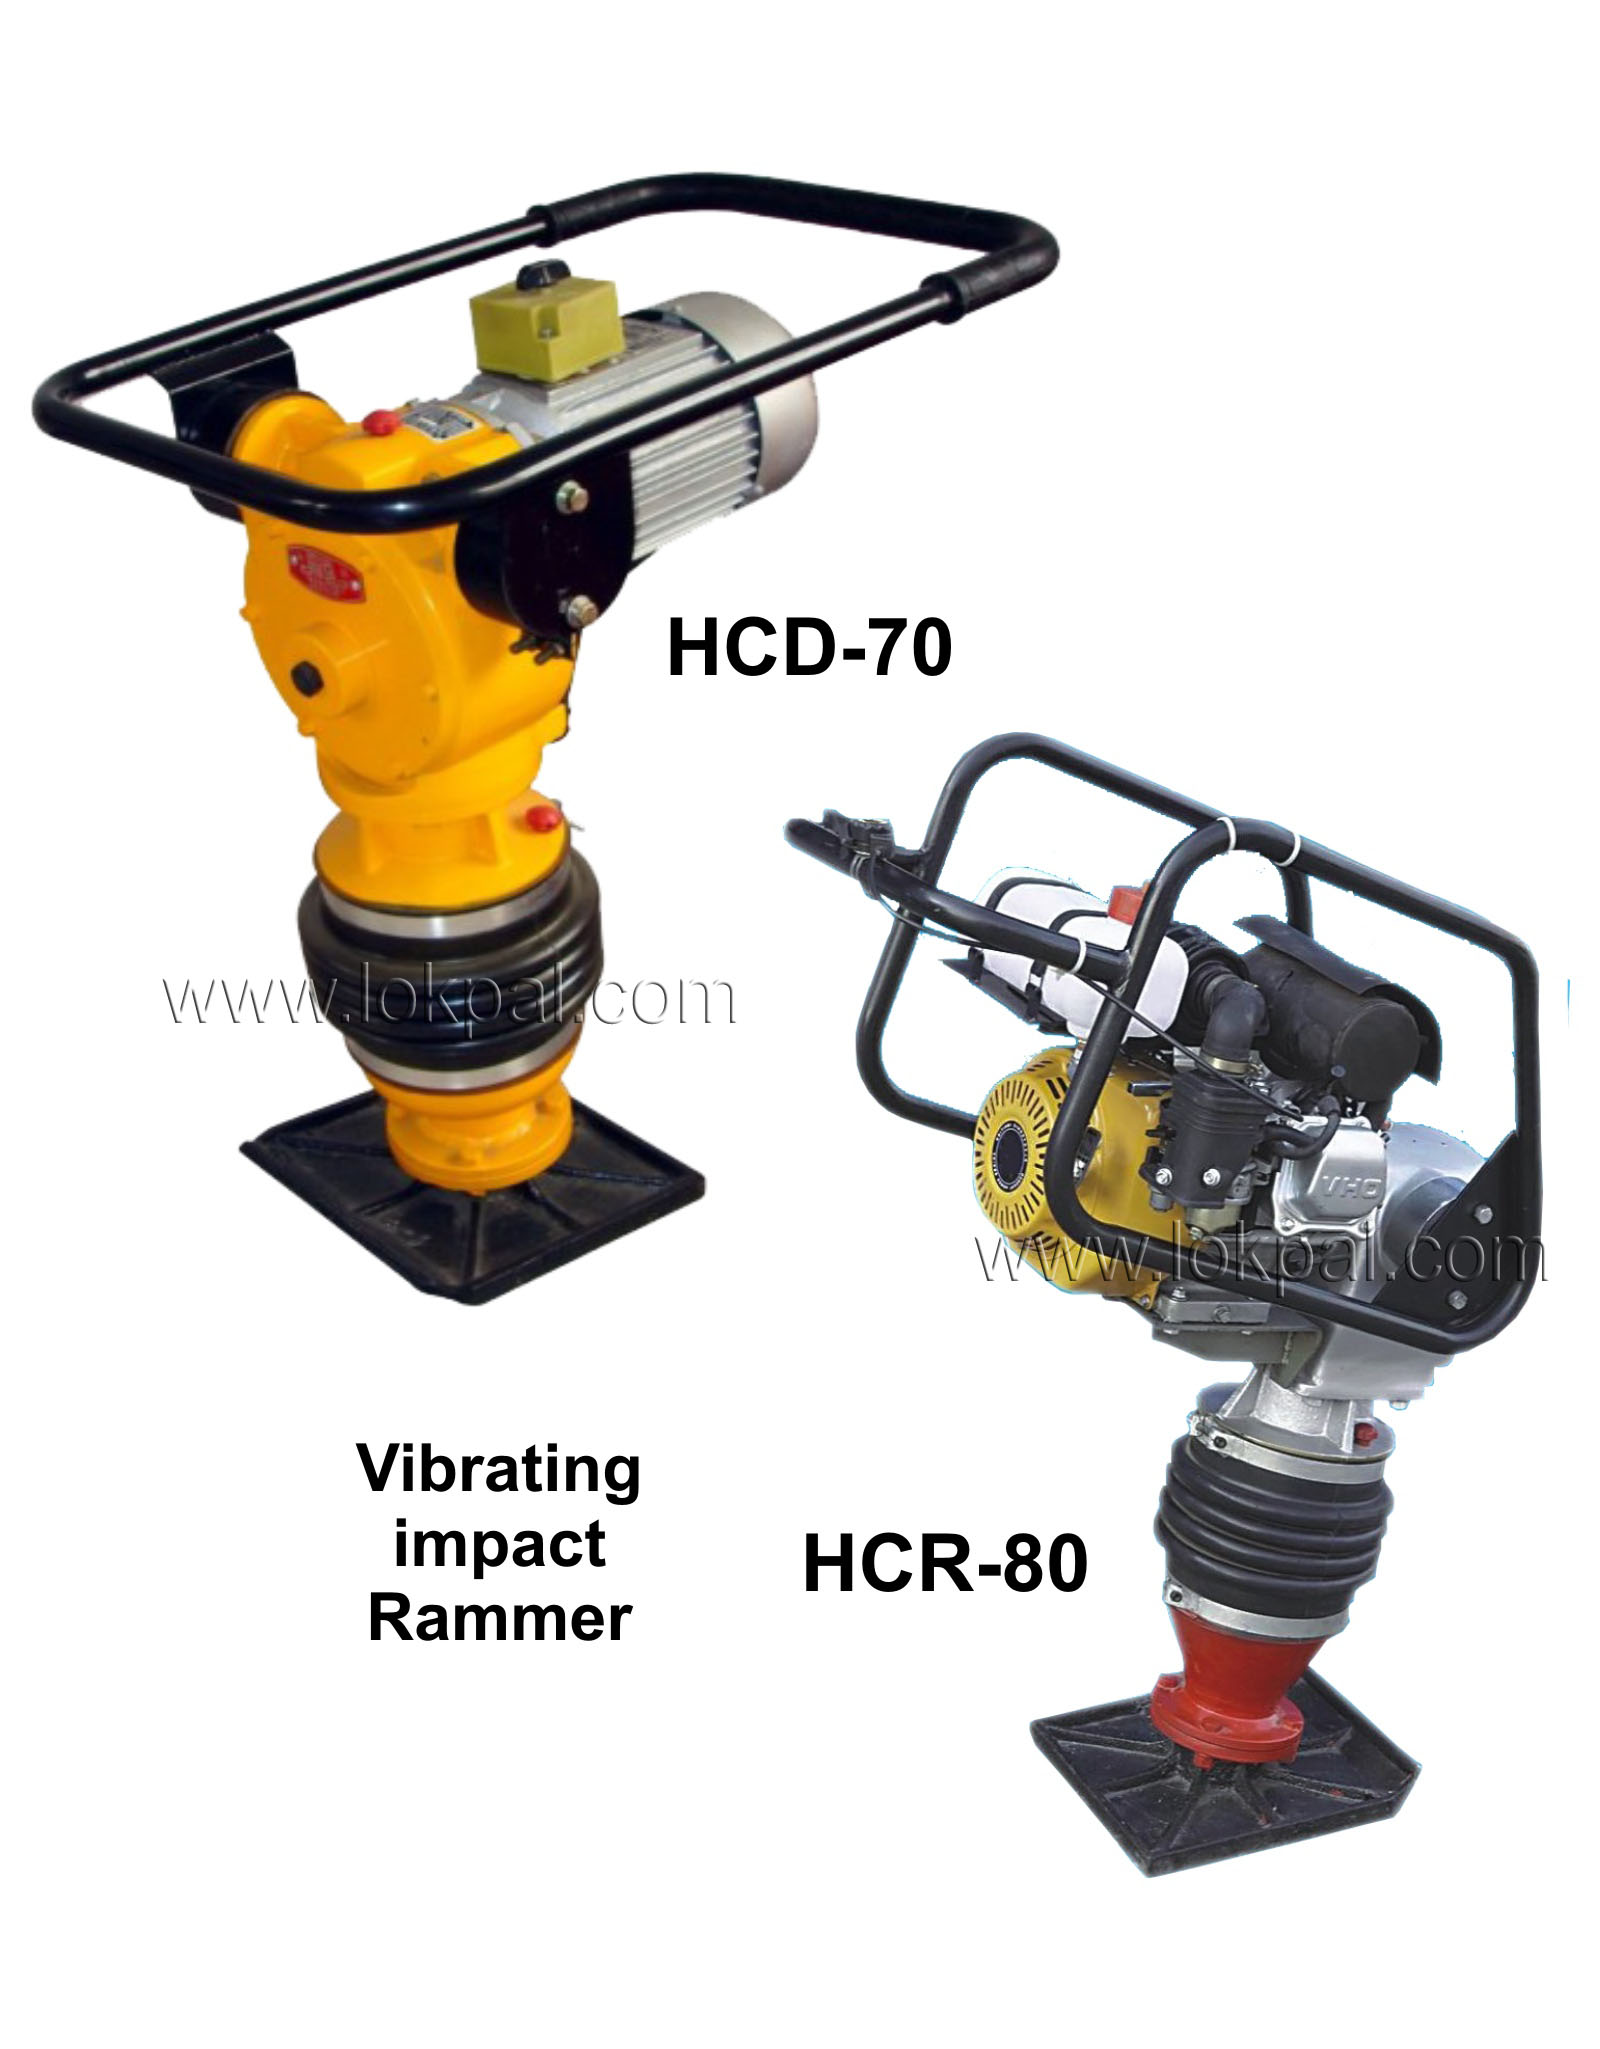 Vibrating Impact Rammers